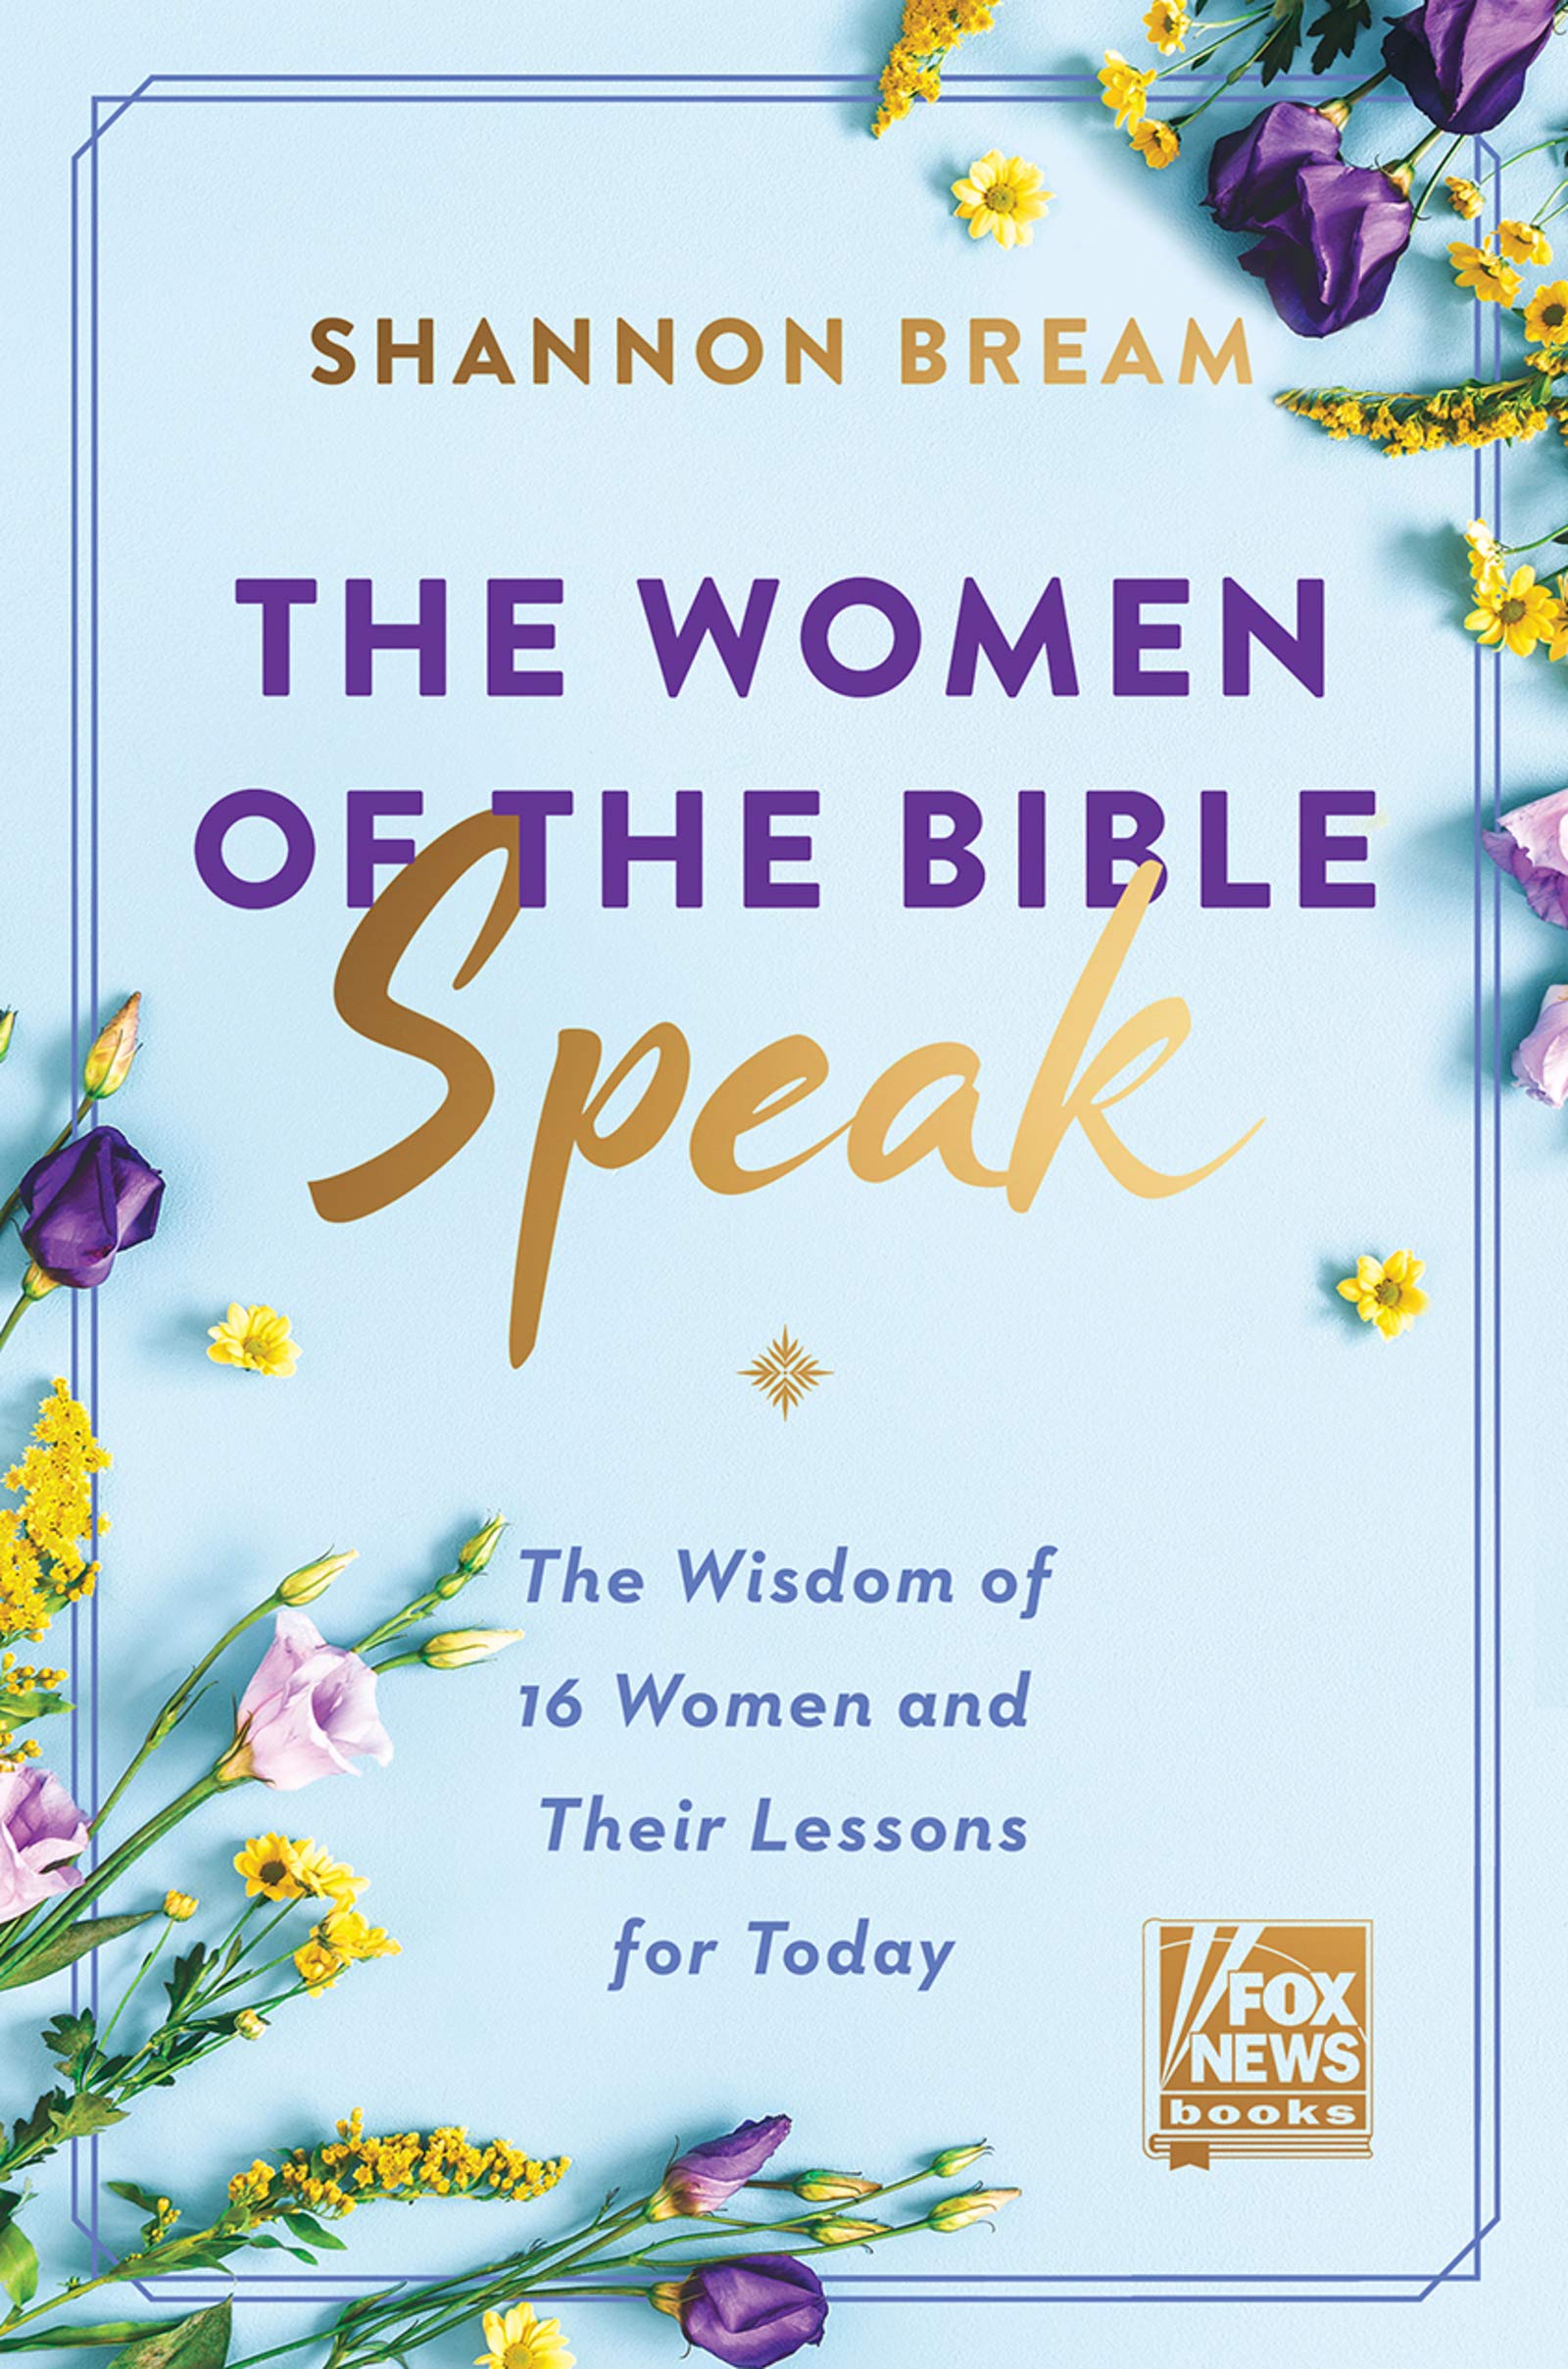 Image for "The Women of the Bible Speak"